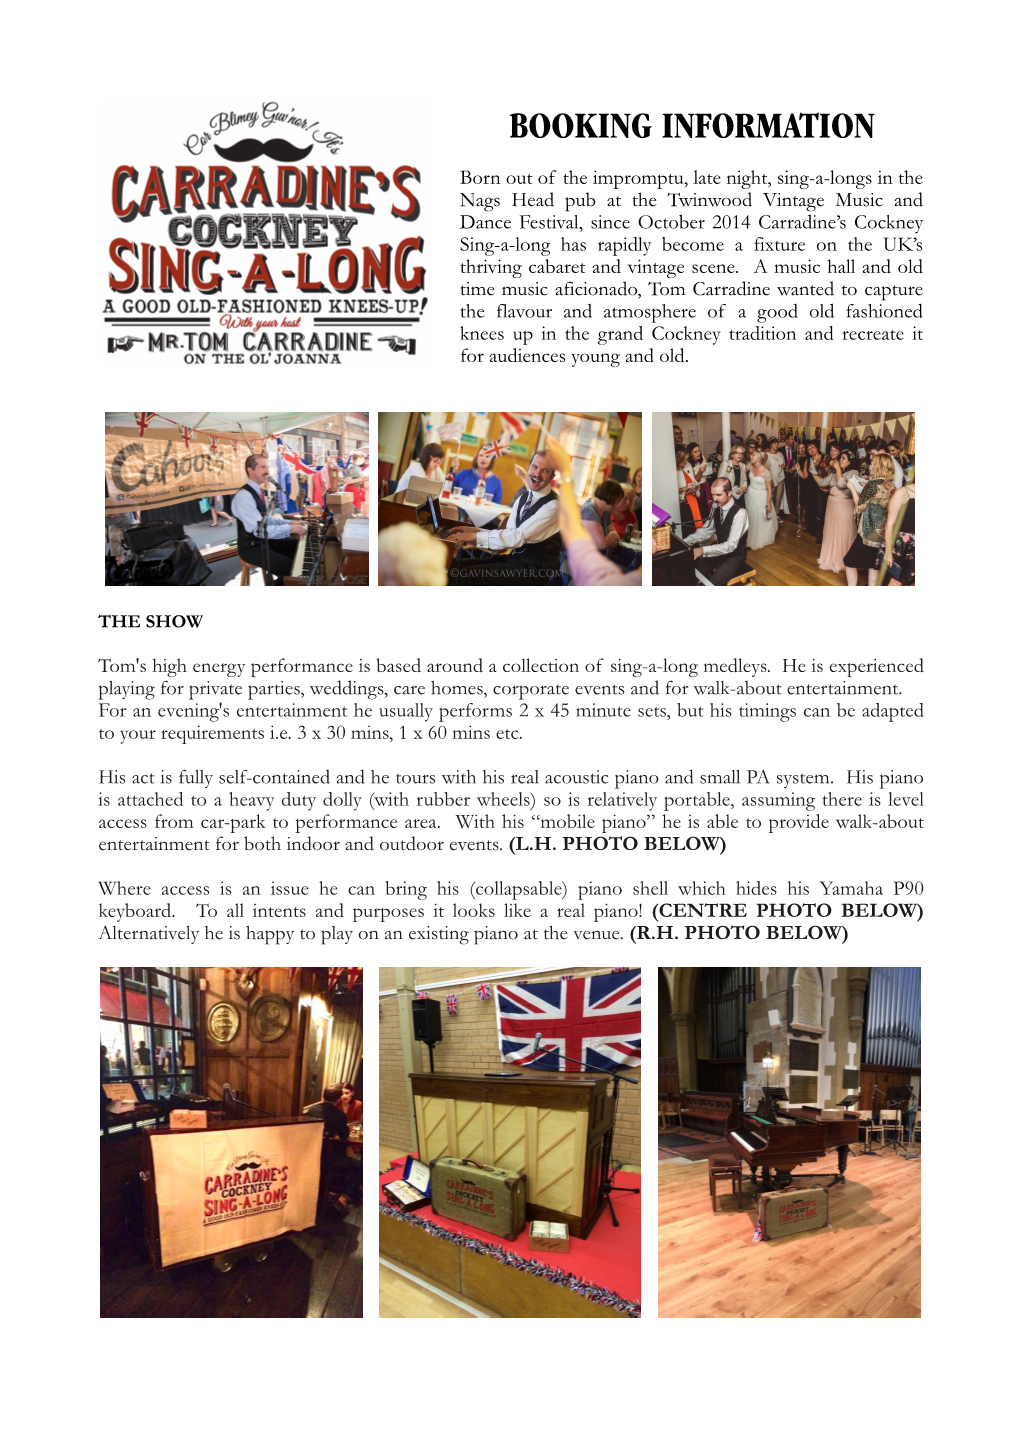 Carradine's Cockney Sing-A-Long Booking Information